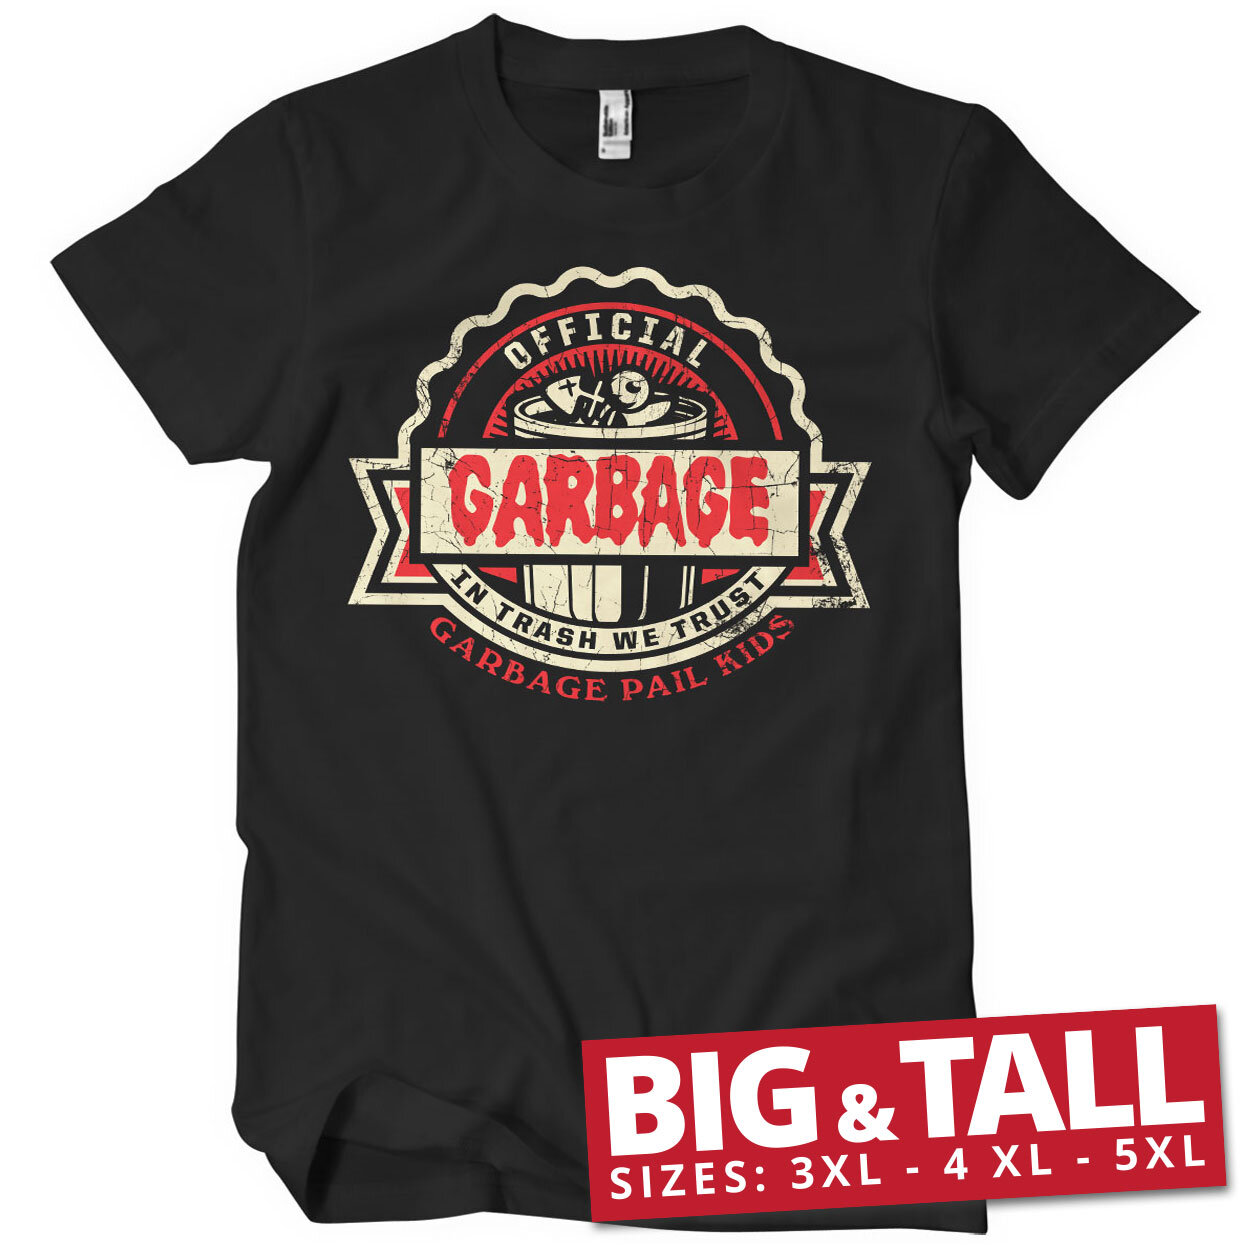 Official Garbage Big & Tall T-Shirt